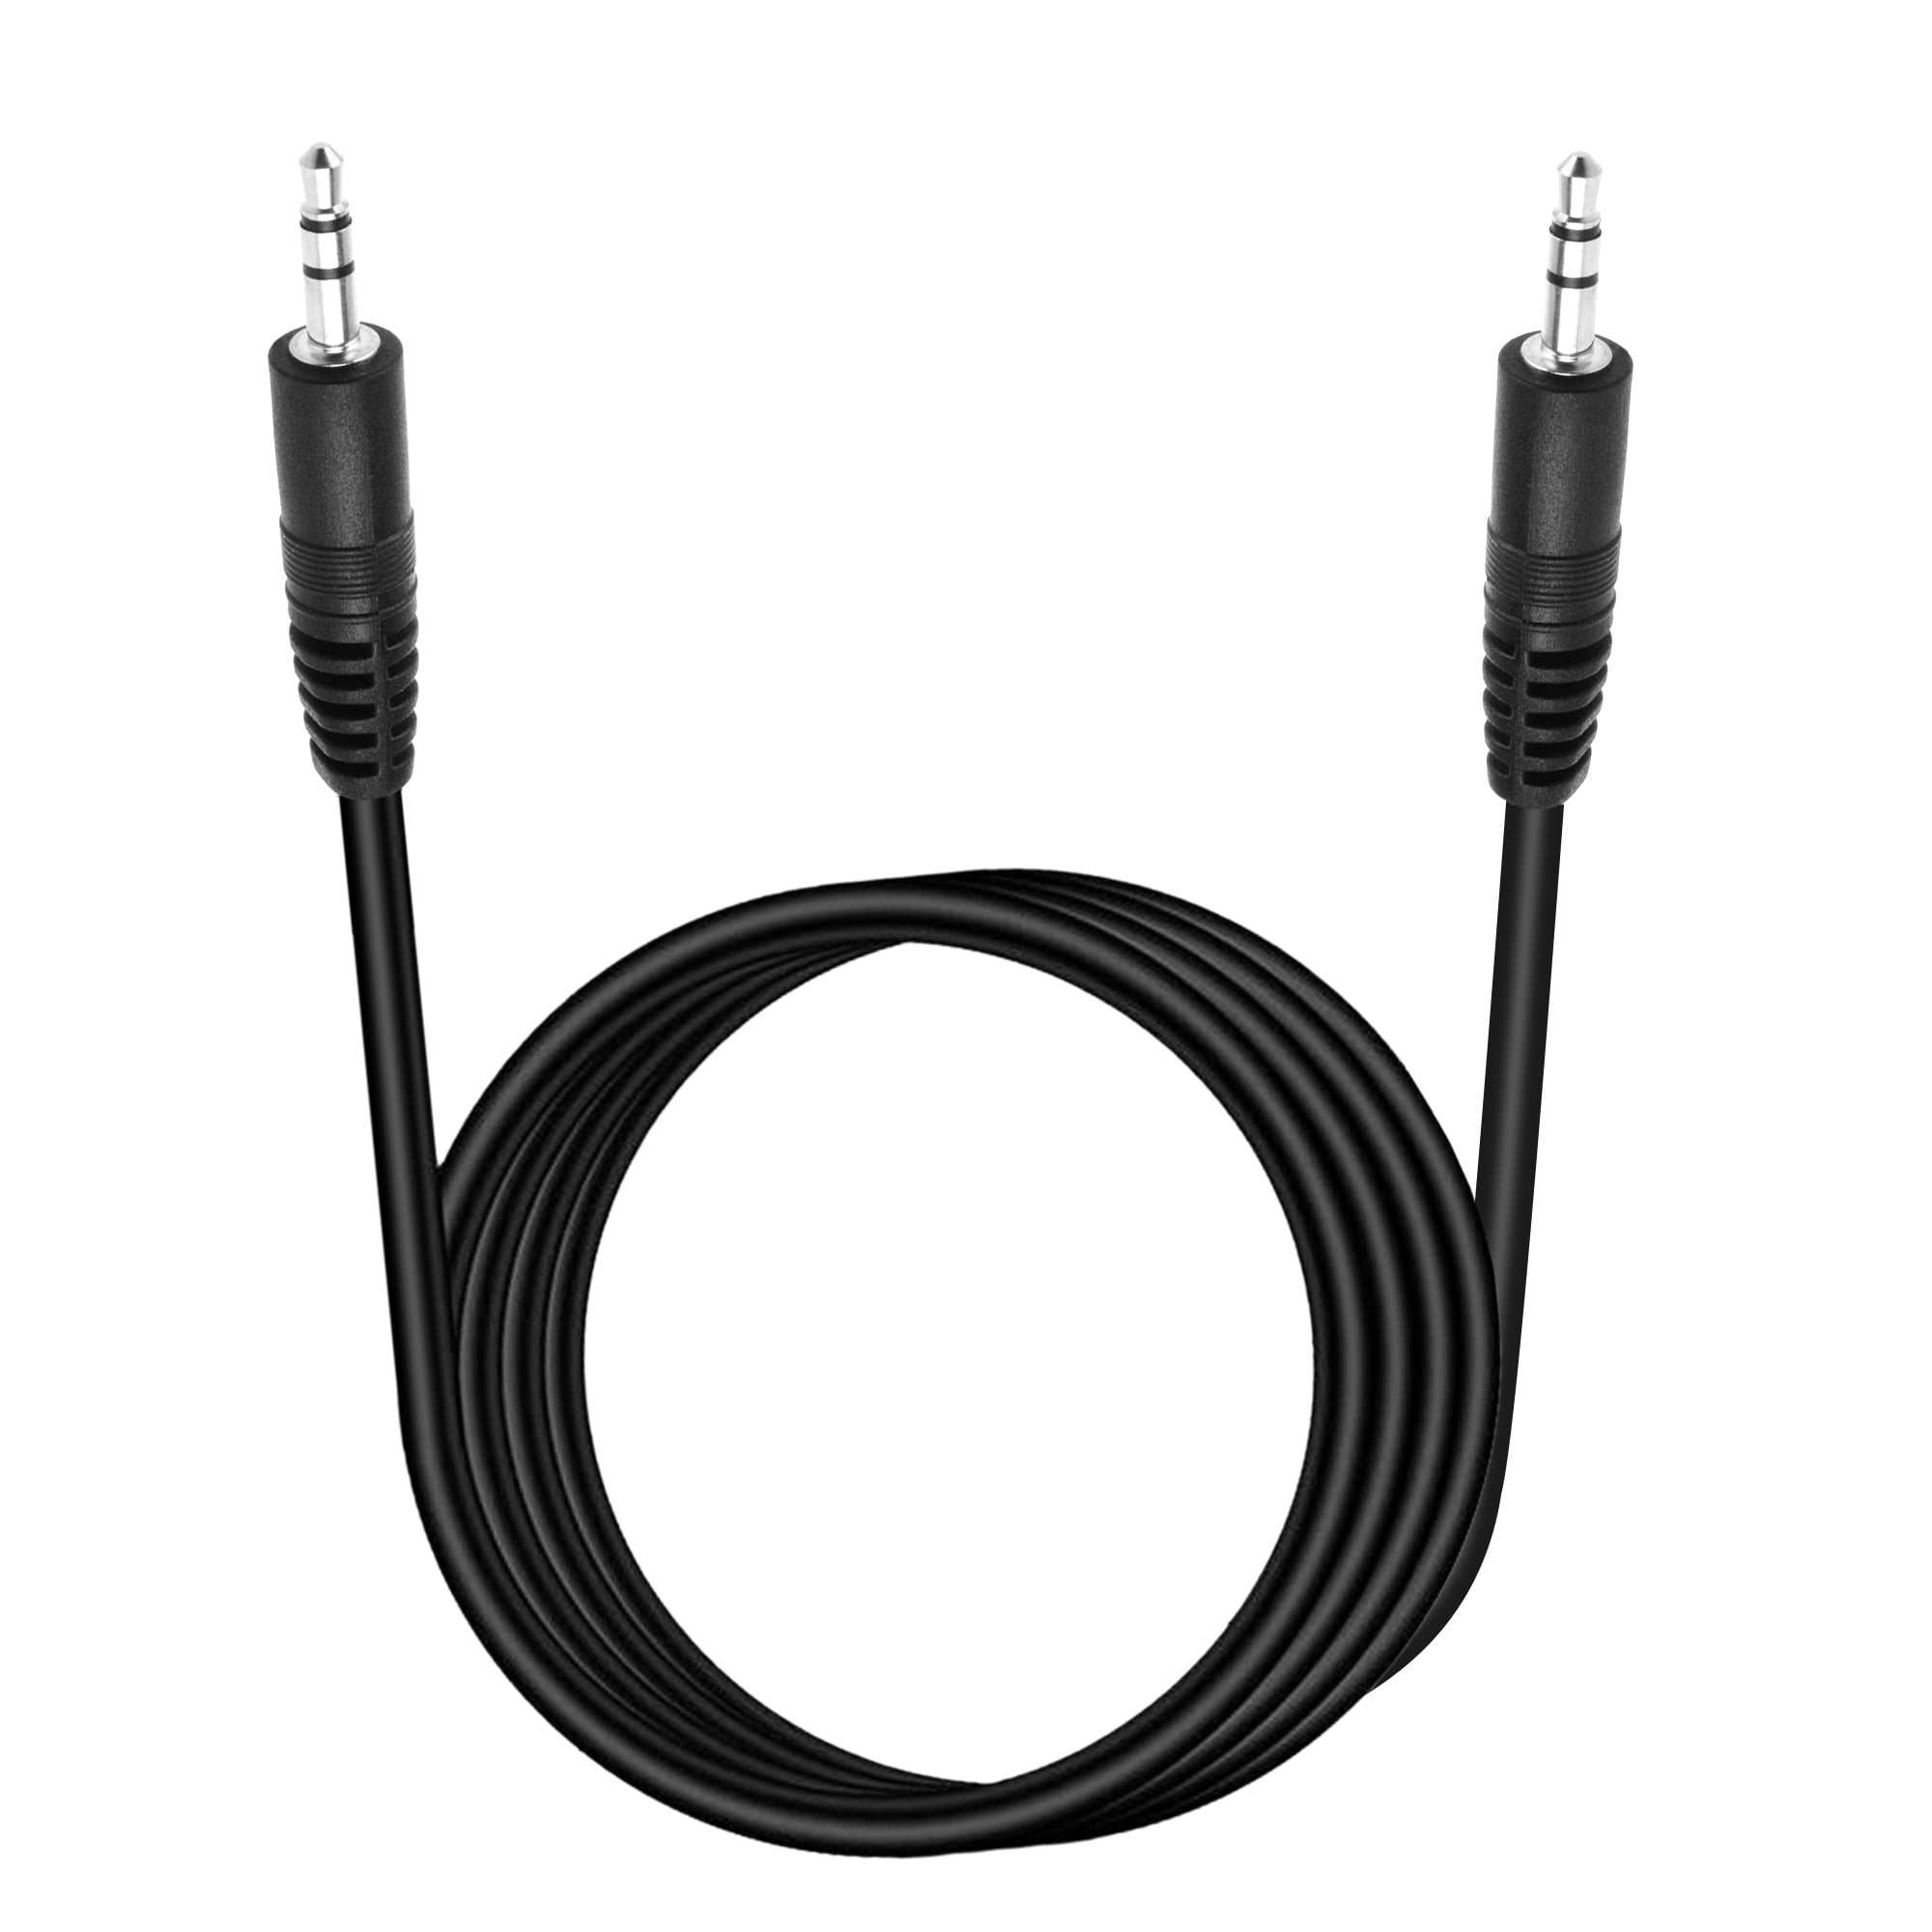 K MAINS 6ft Black Premium 3.5mm Audio Cable Cord Replacement for